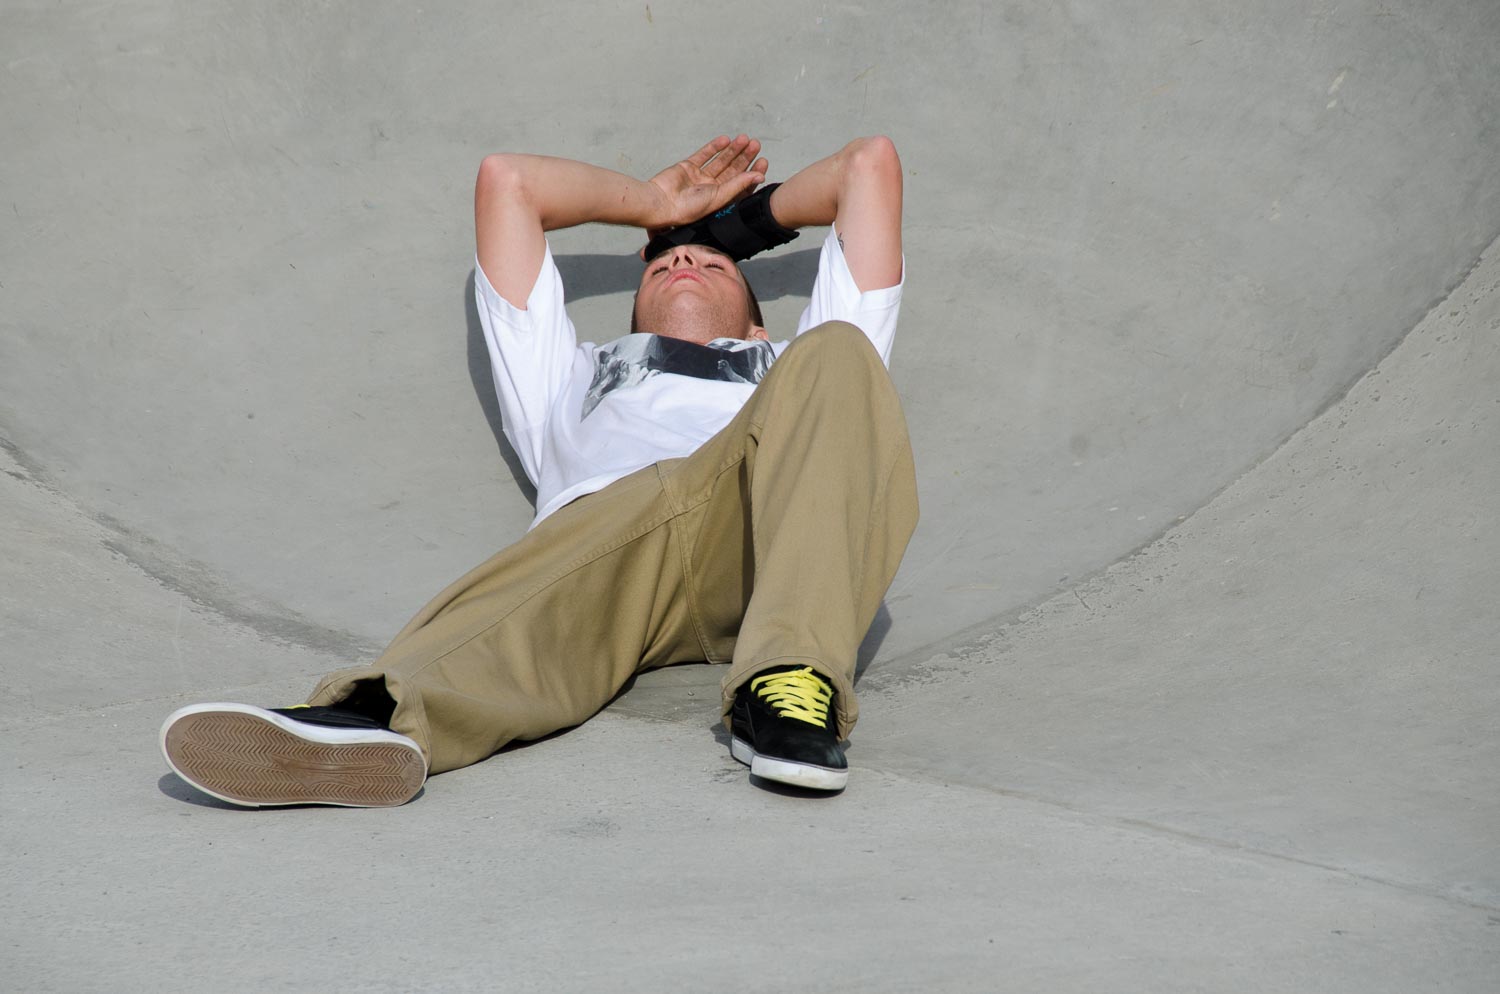  Raven won the skateboard x-games when he was l8. Here he is after a few dozen falls. 